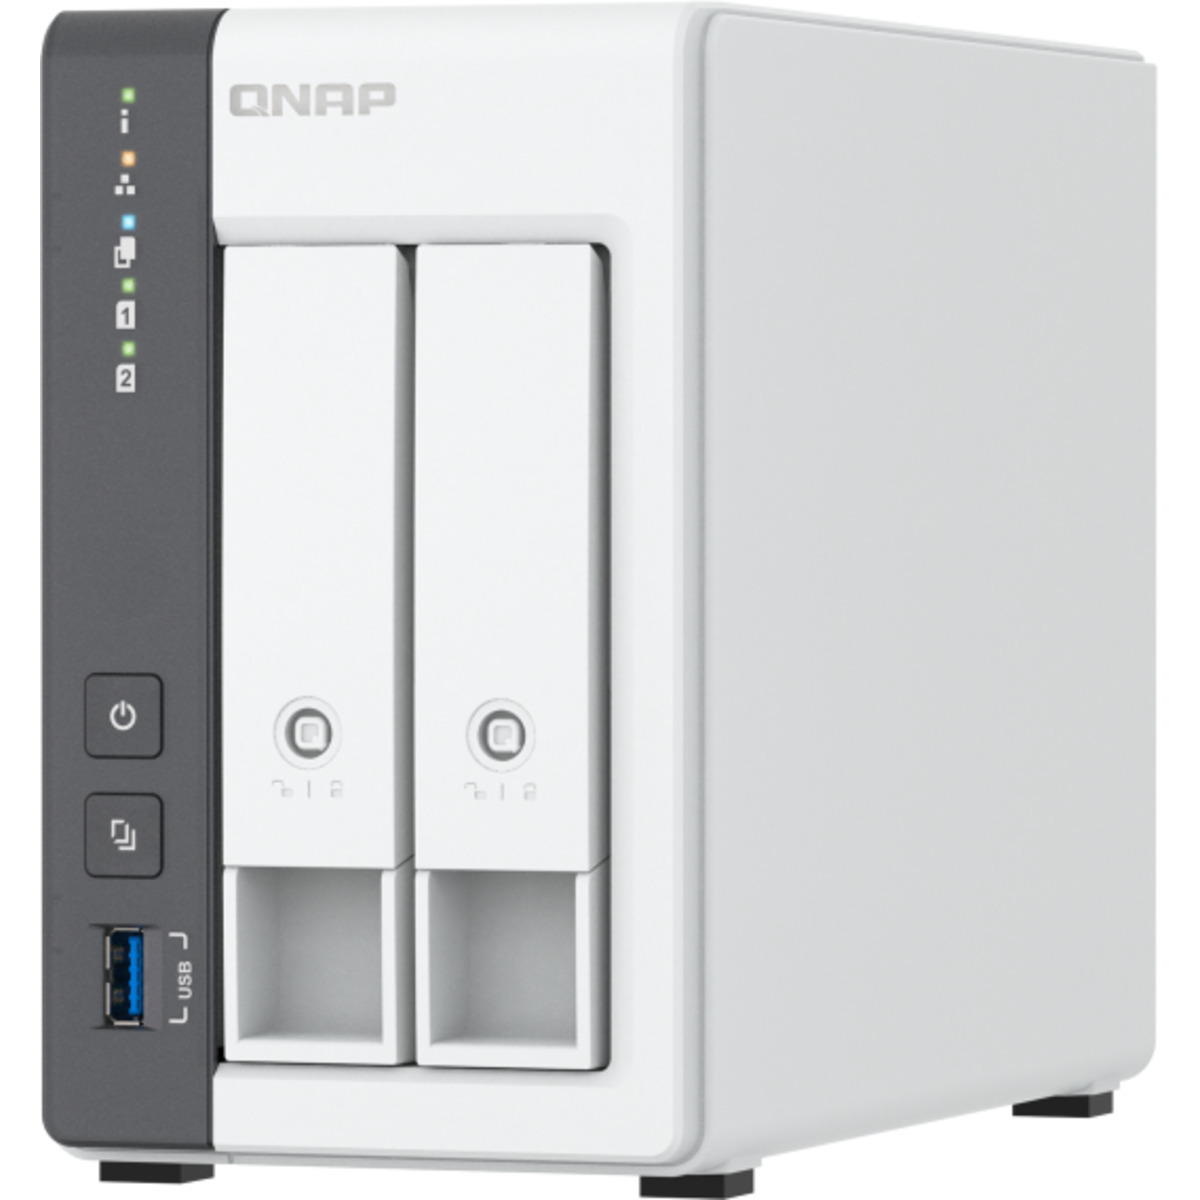 QNAP TS-216G 8tb 2-Bay Desktop Personal / Basic Home / Small Office NAS - Network Attached Storage Device 2x4tb Western Digital Blue WD40EZRZ 3.5 5400rpm SATA 6Gb/s HDD CONSUMER Class Drives Installed - Burn-In Tested - ON SALE TS-216G